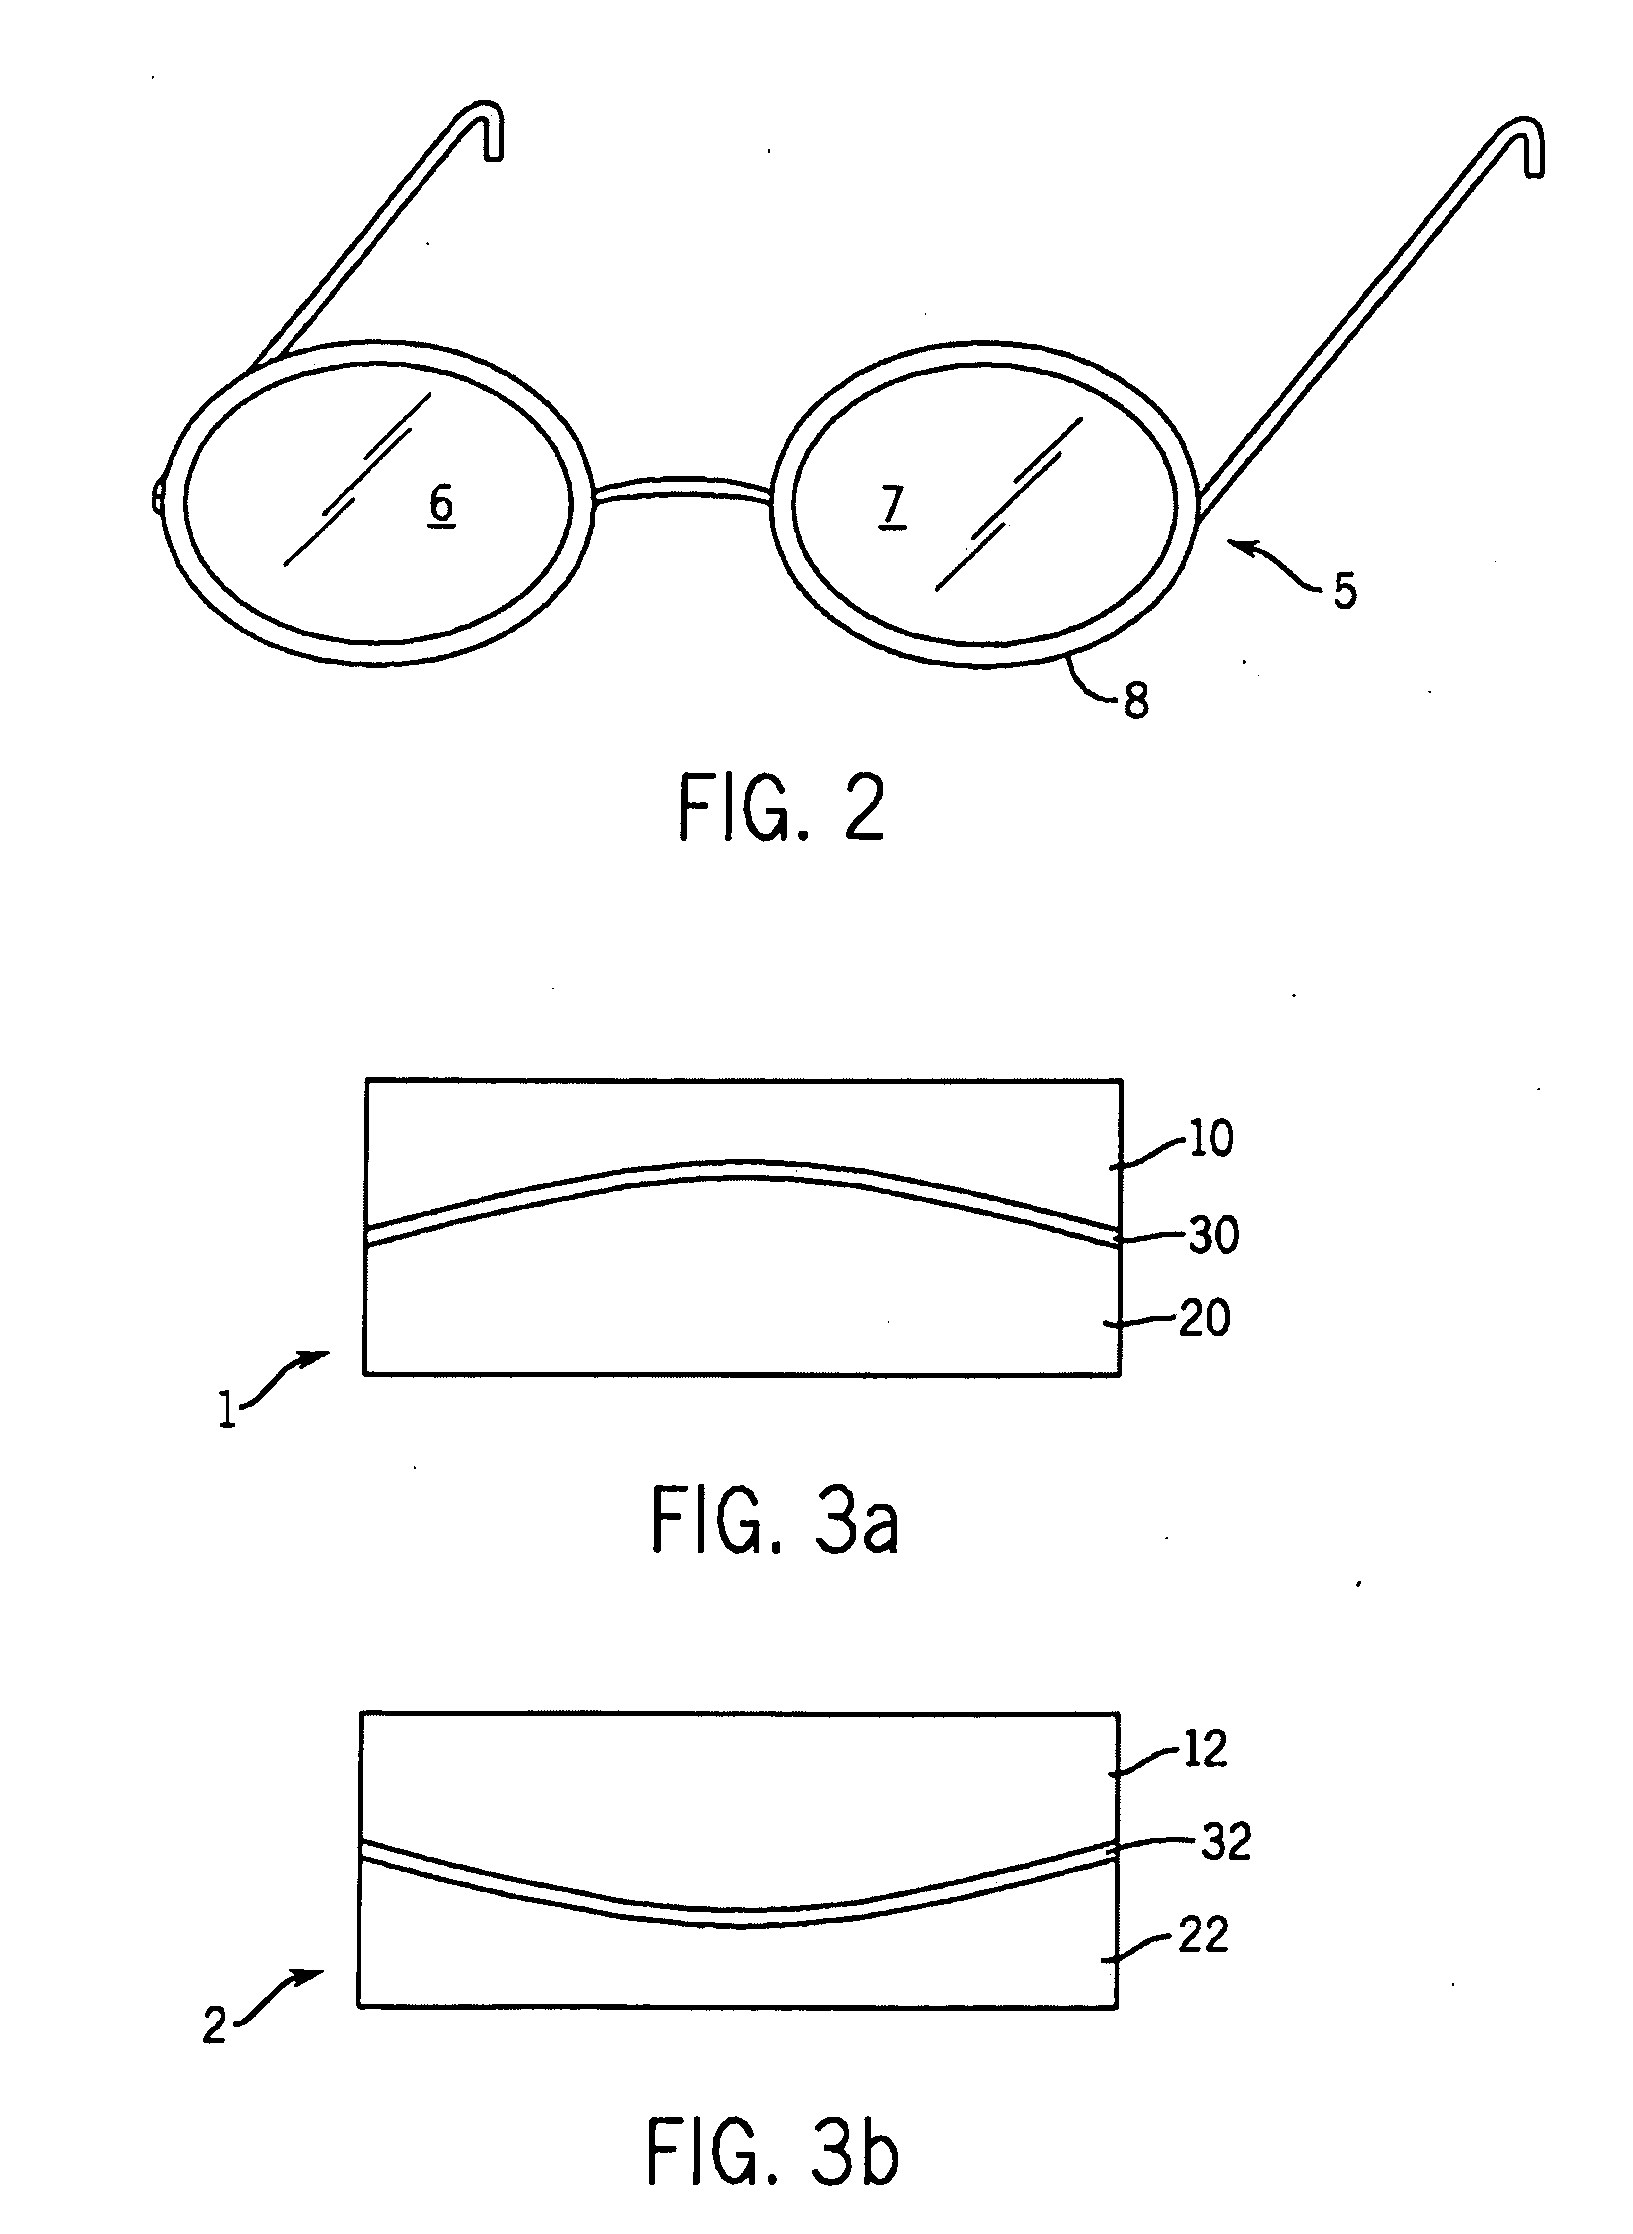 Fluidic Adaptive Lens Systems and Methods